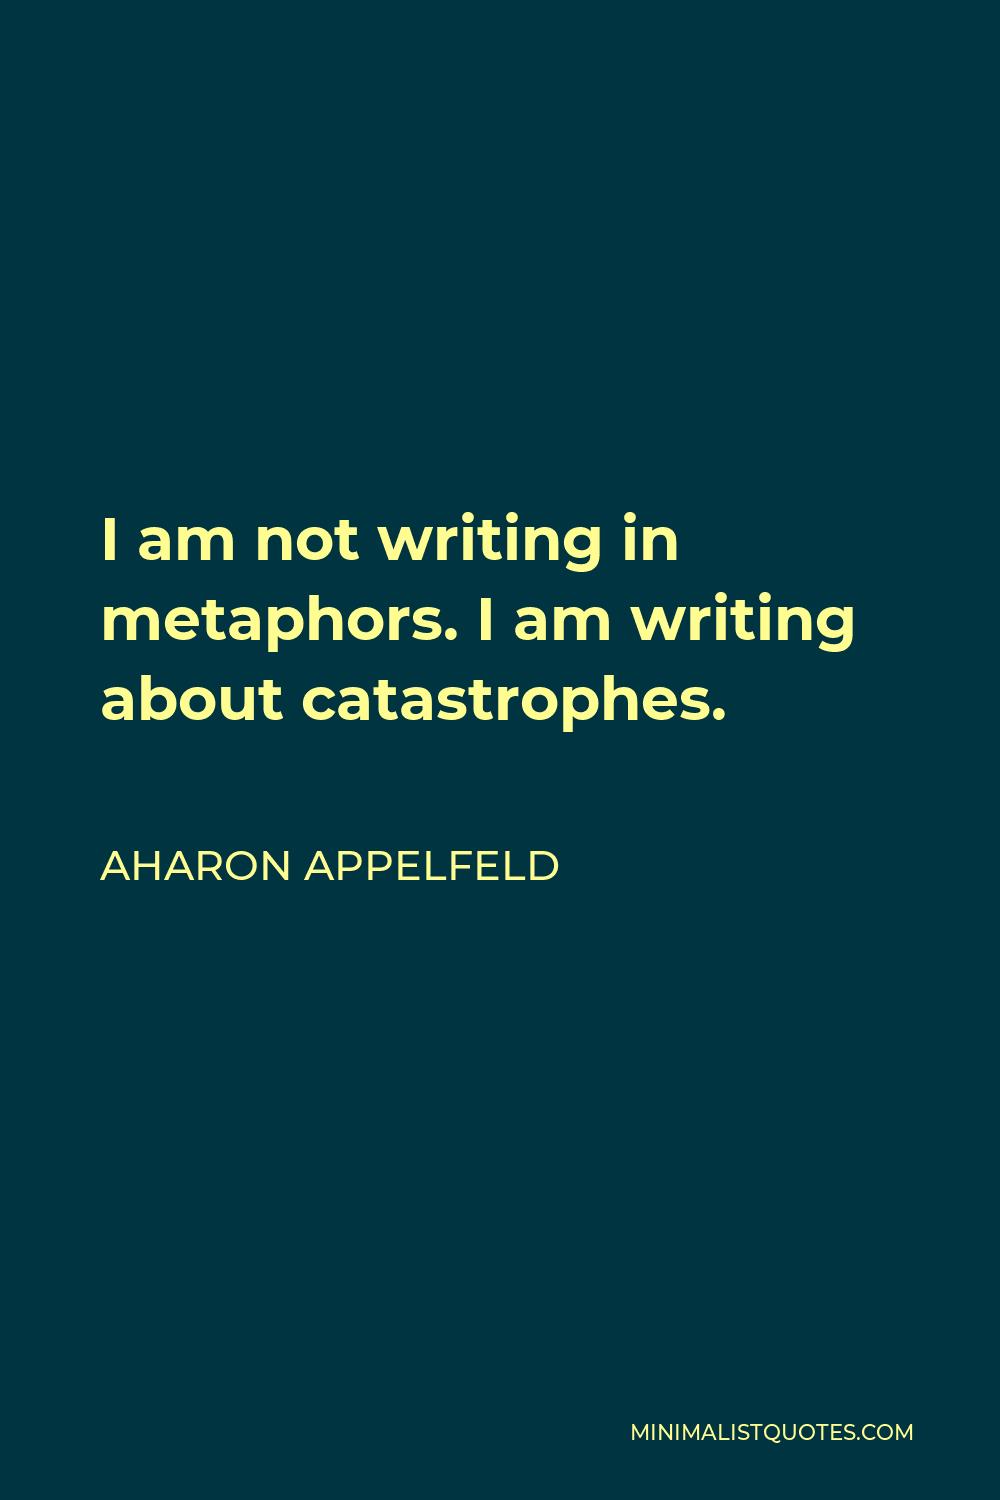 Aharon Appelfeld Quote - I am not writing in metaphors. I am writing about catastrophes.